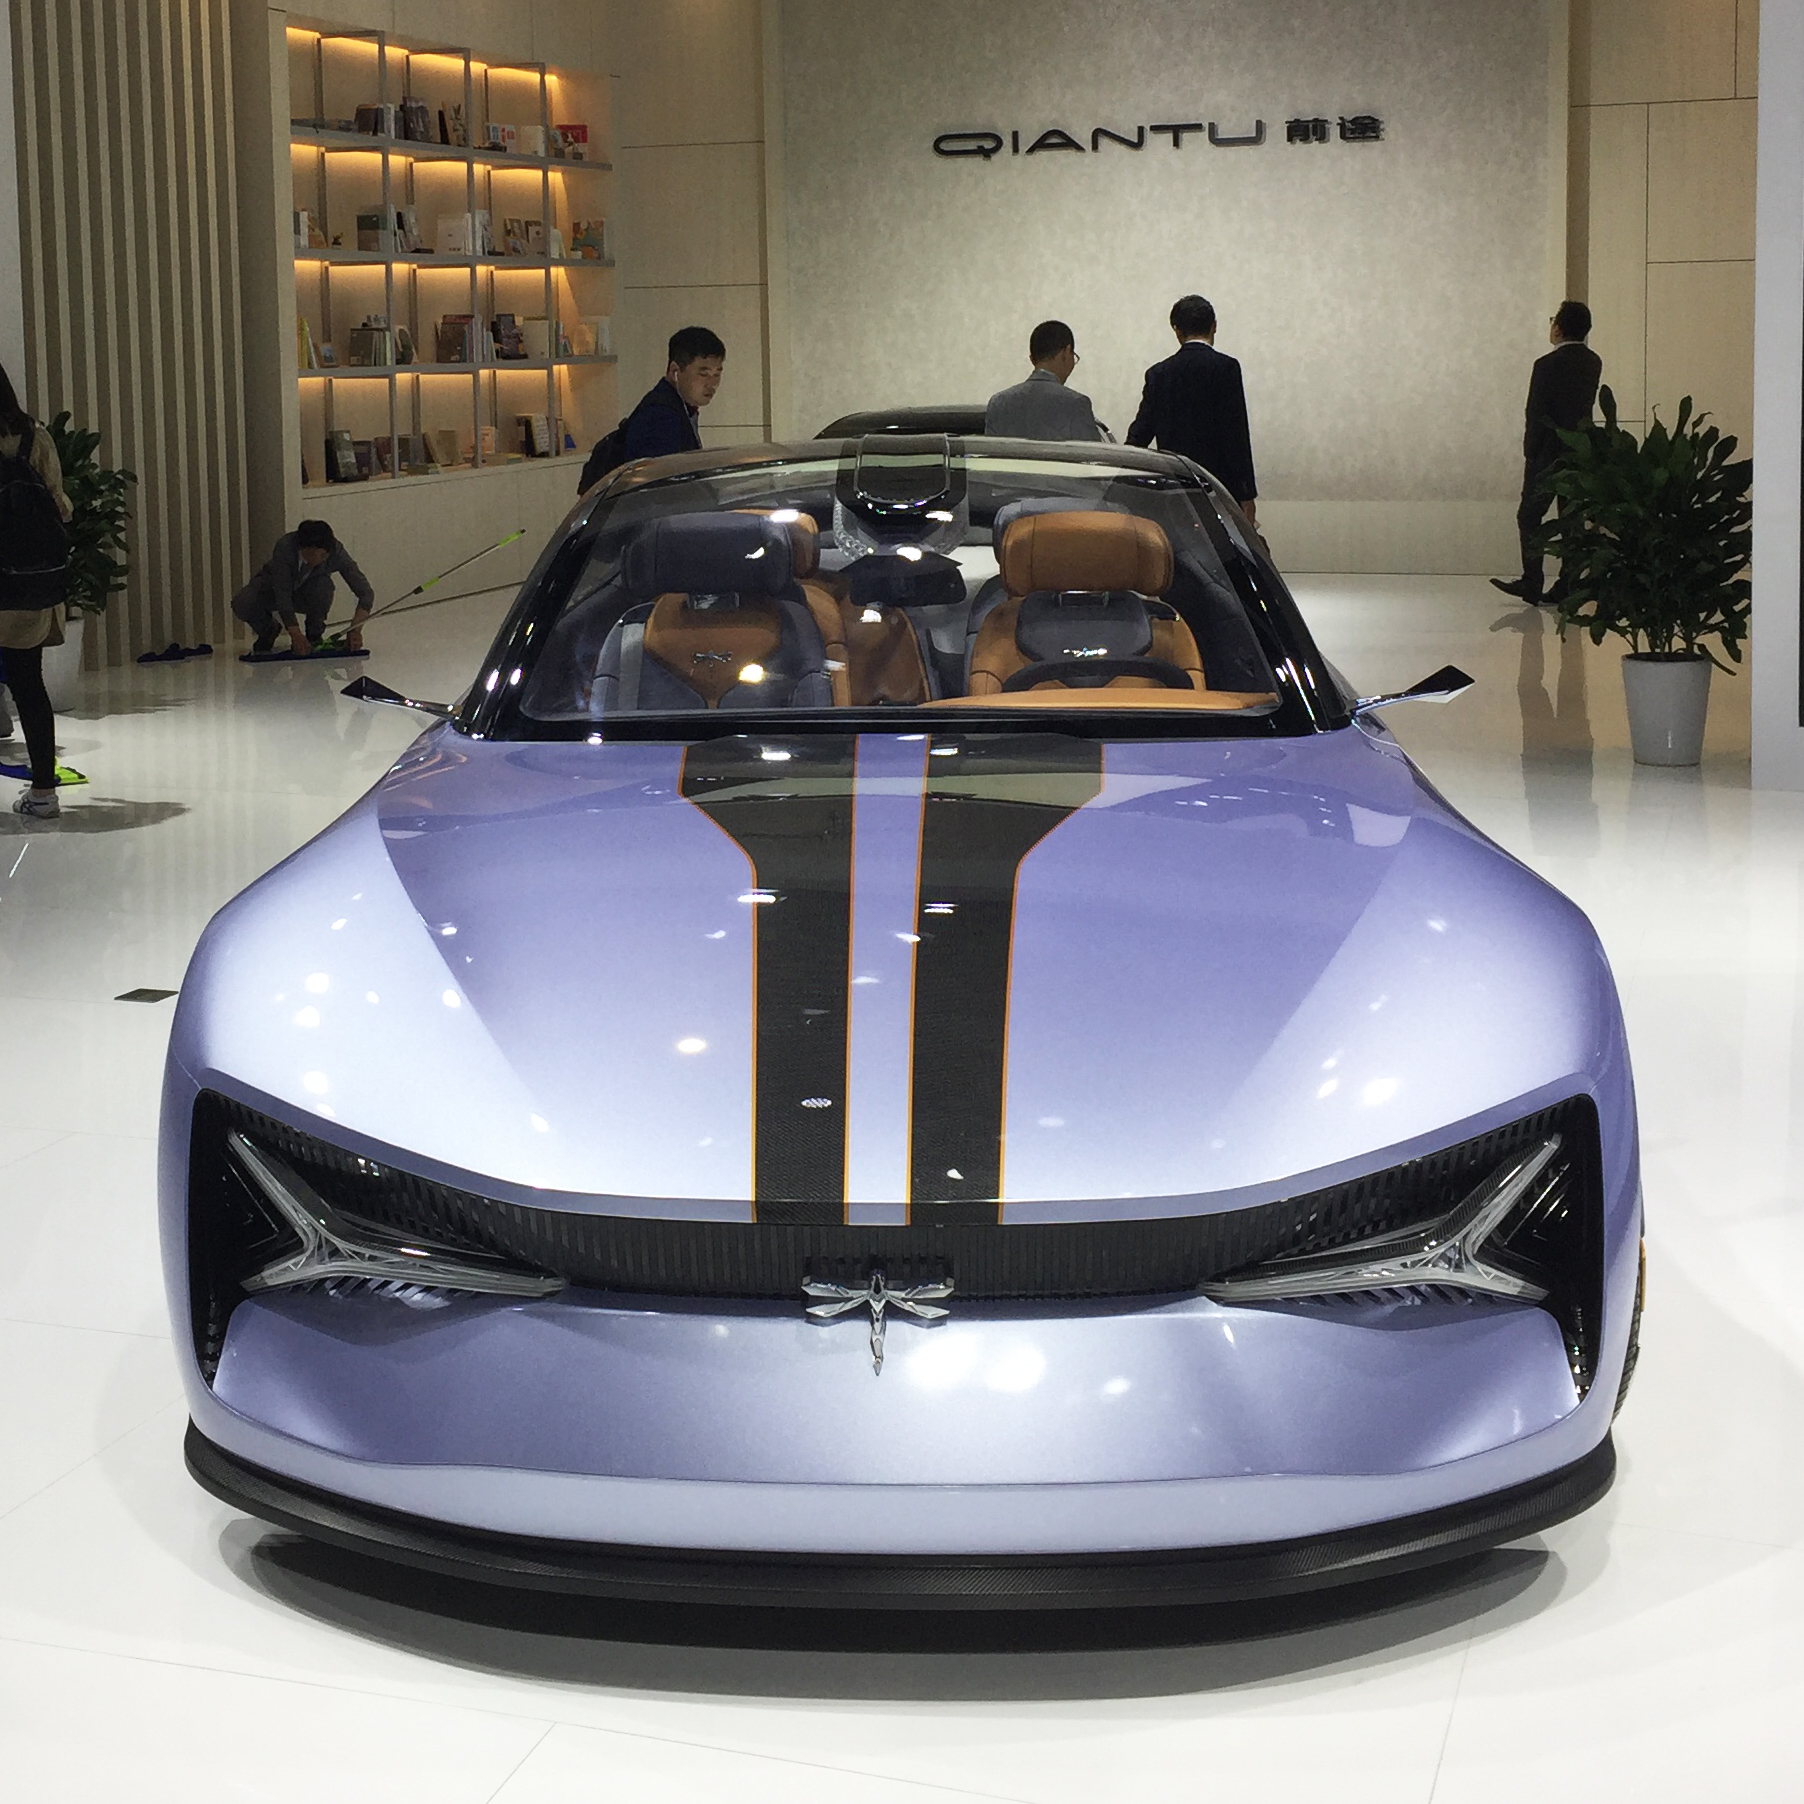 10 electric cars by Chinese car companies at Auto Shanghai 2019: Concept 1 by Qiantu Motor